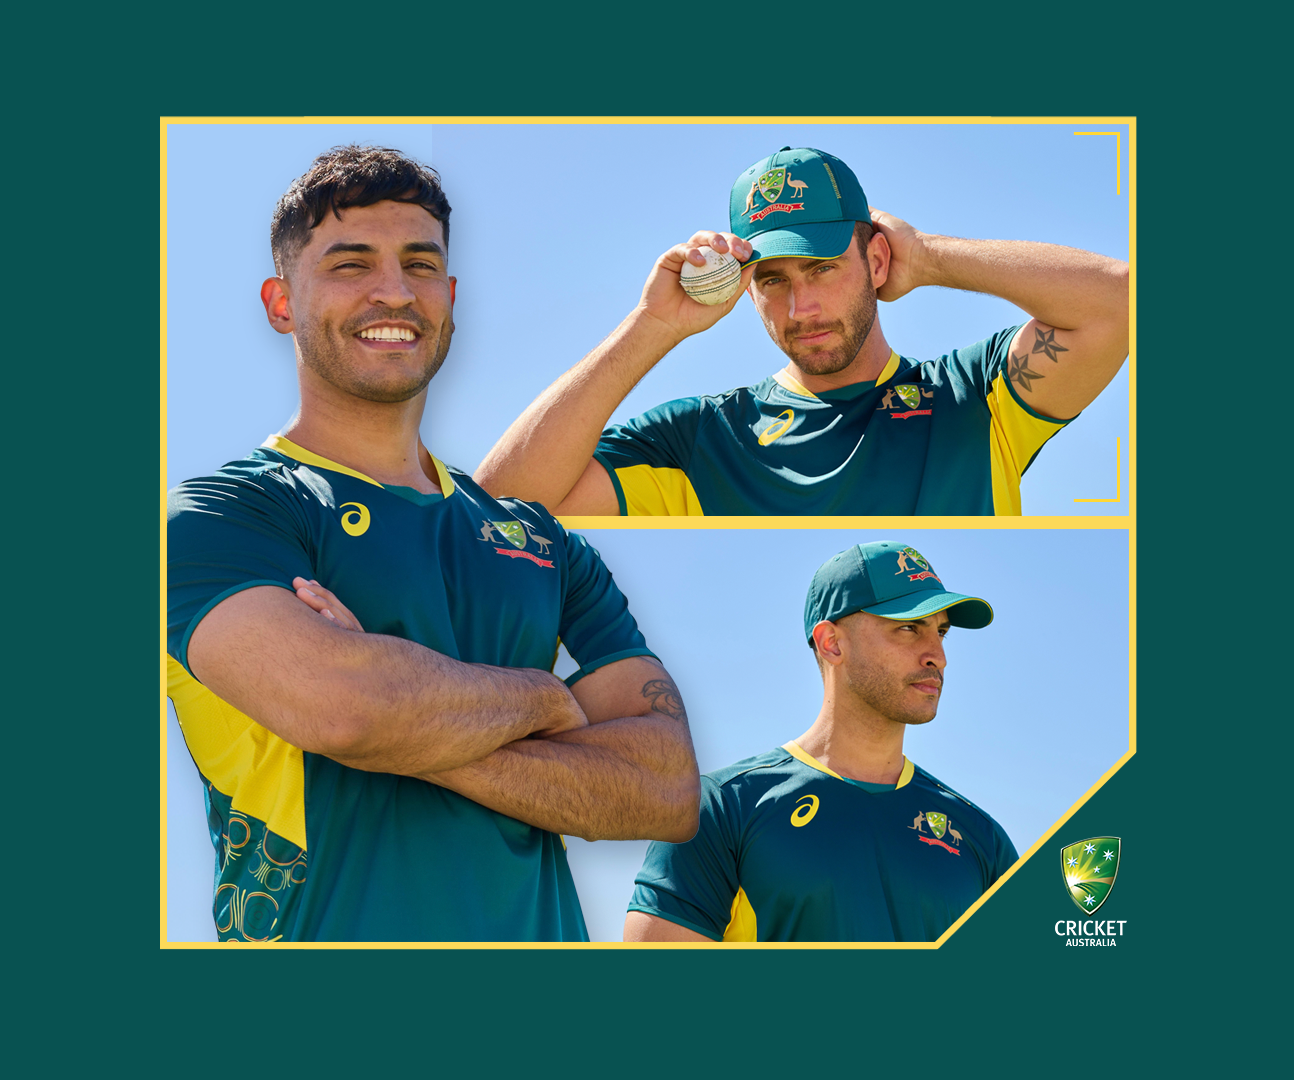 Get ready and show your support when Australia takes on New Zealand with the official Cricket Australia T20 jersey. Available here!